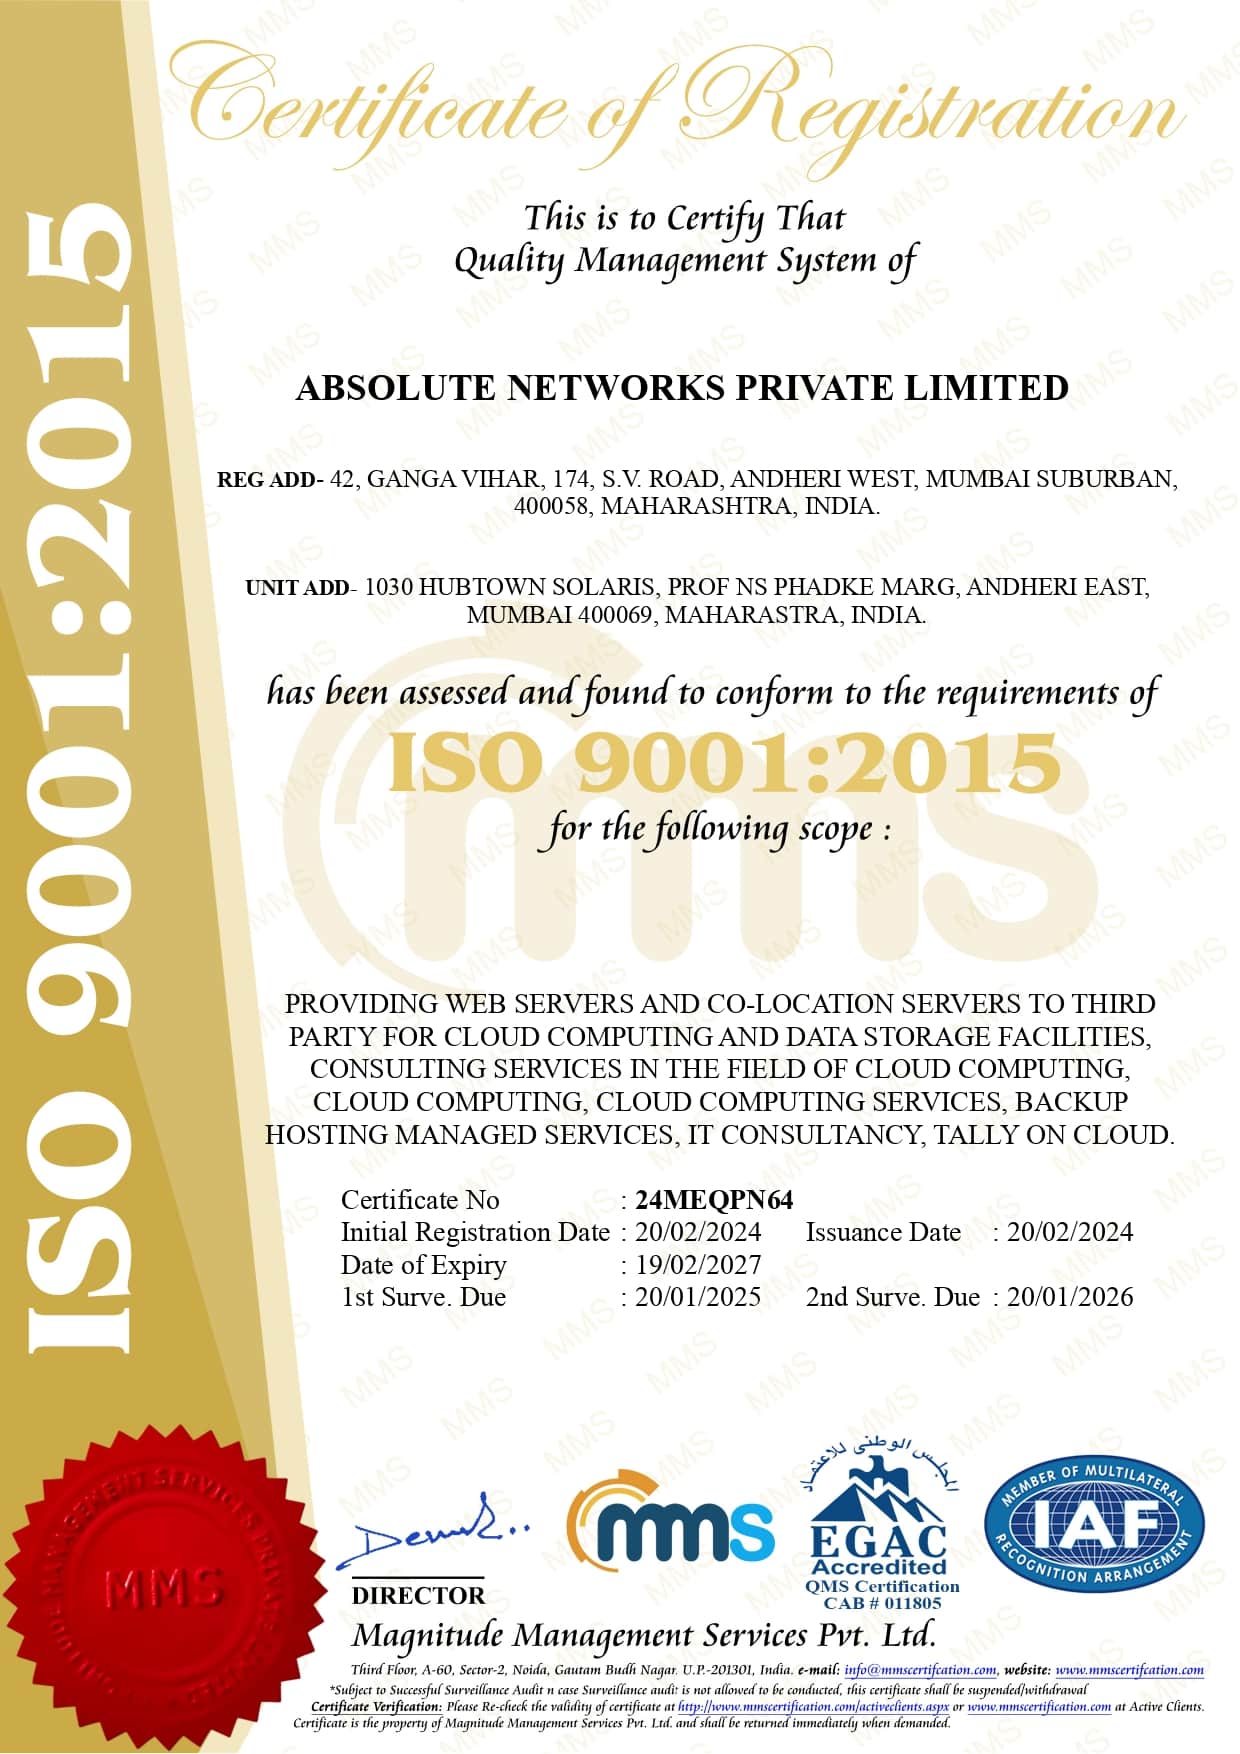 Absolute Networks Private Limited Iso 9001 Certificate